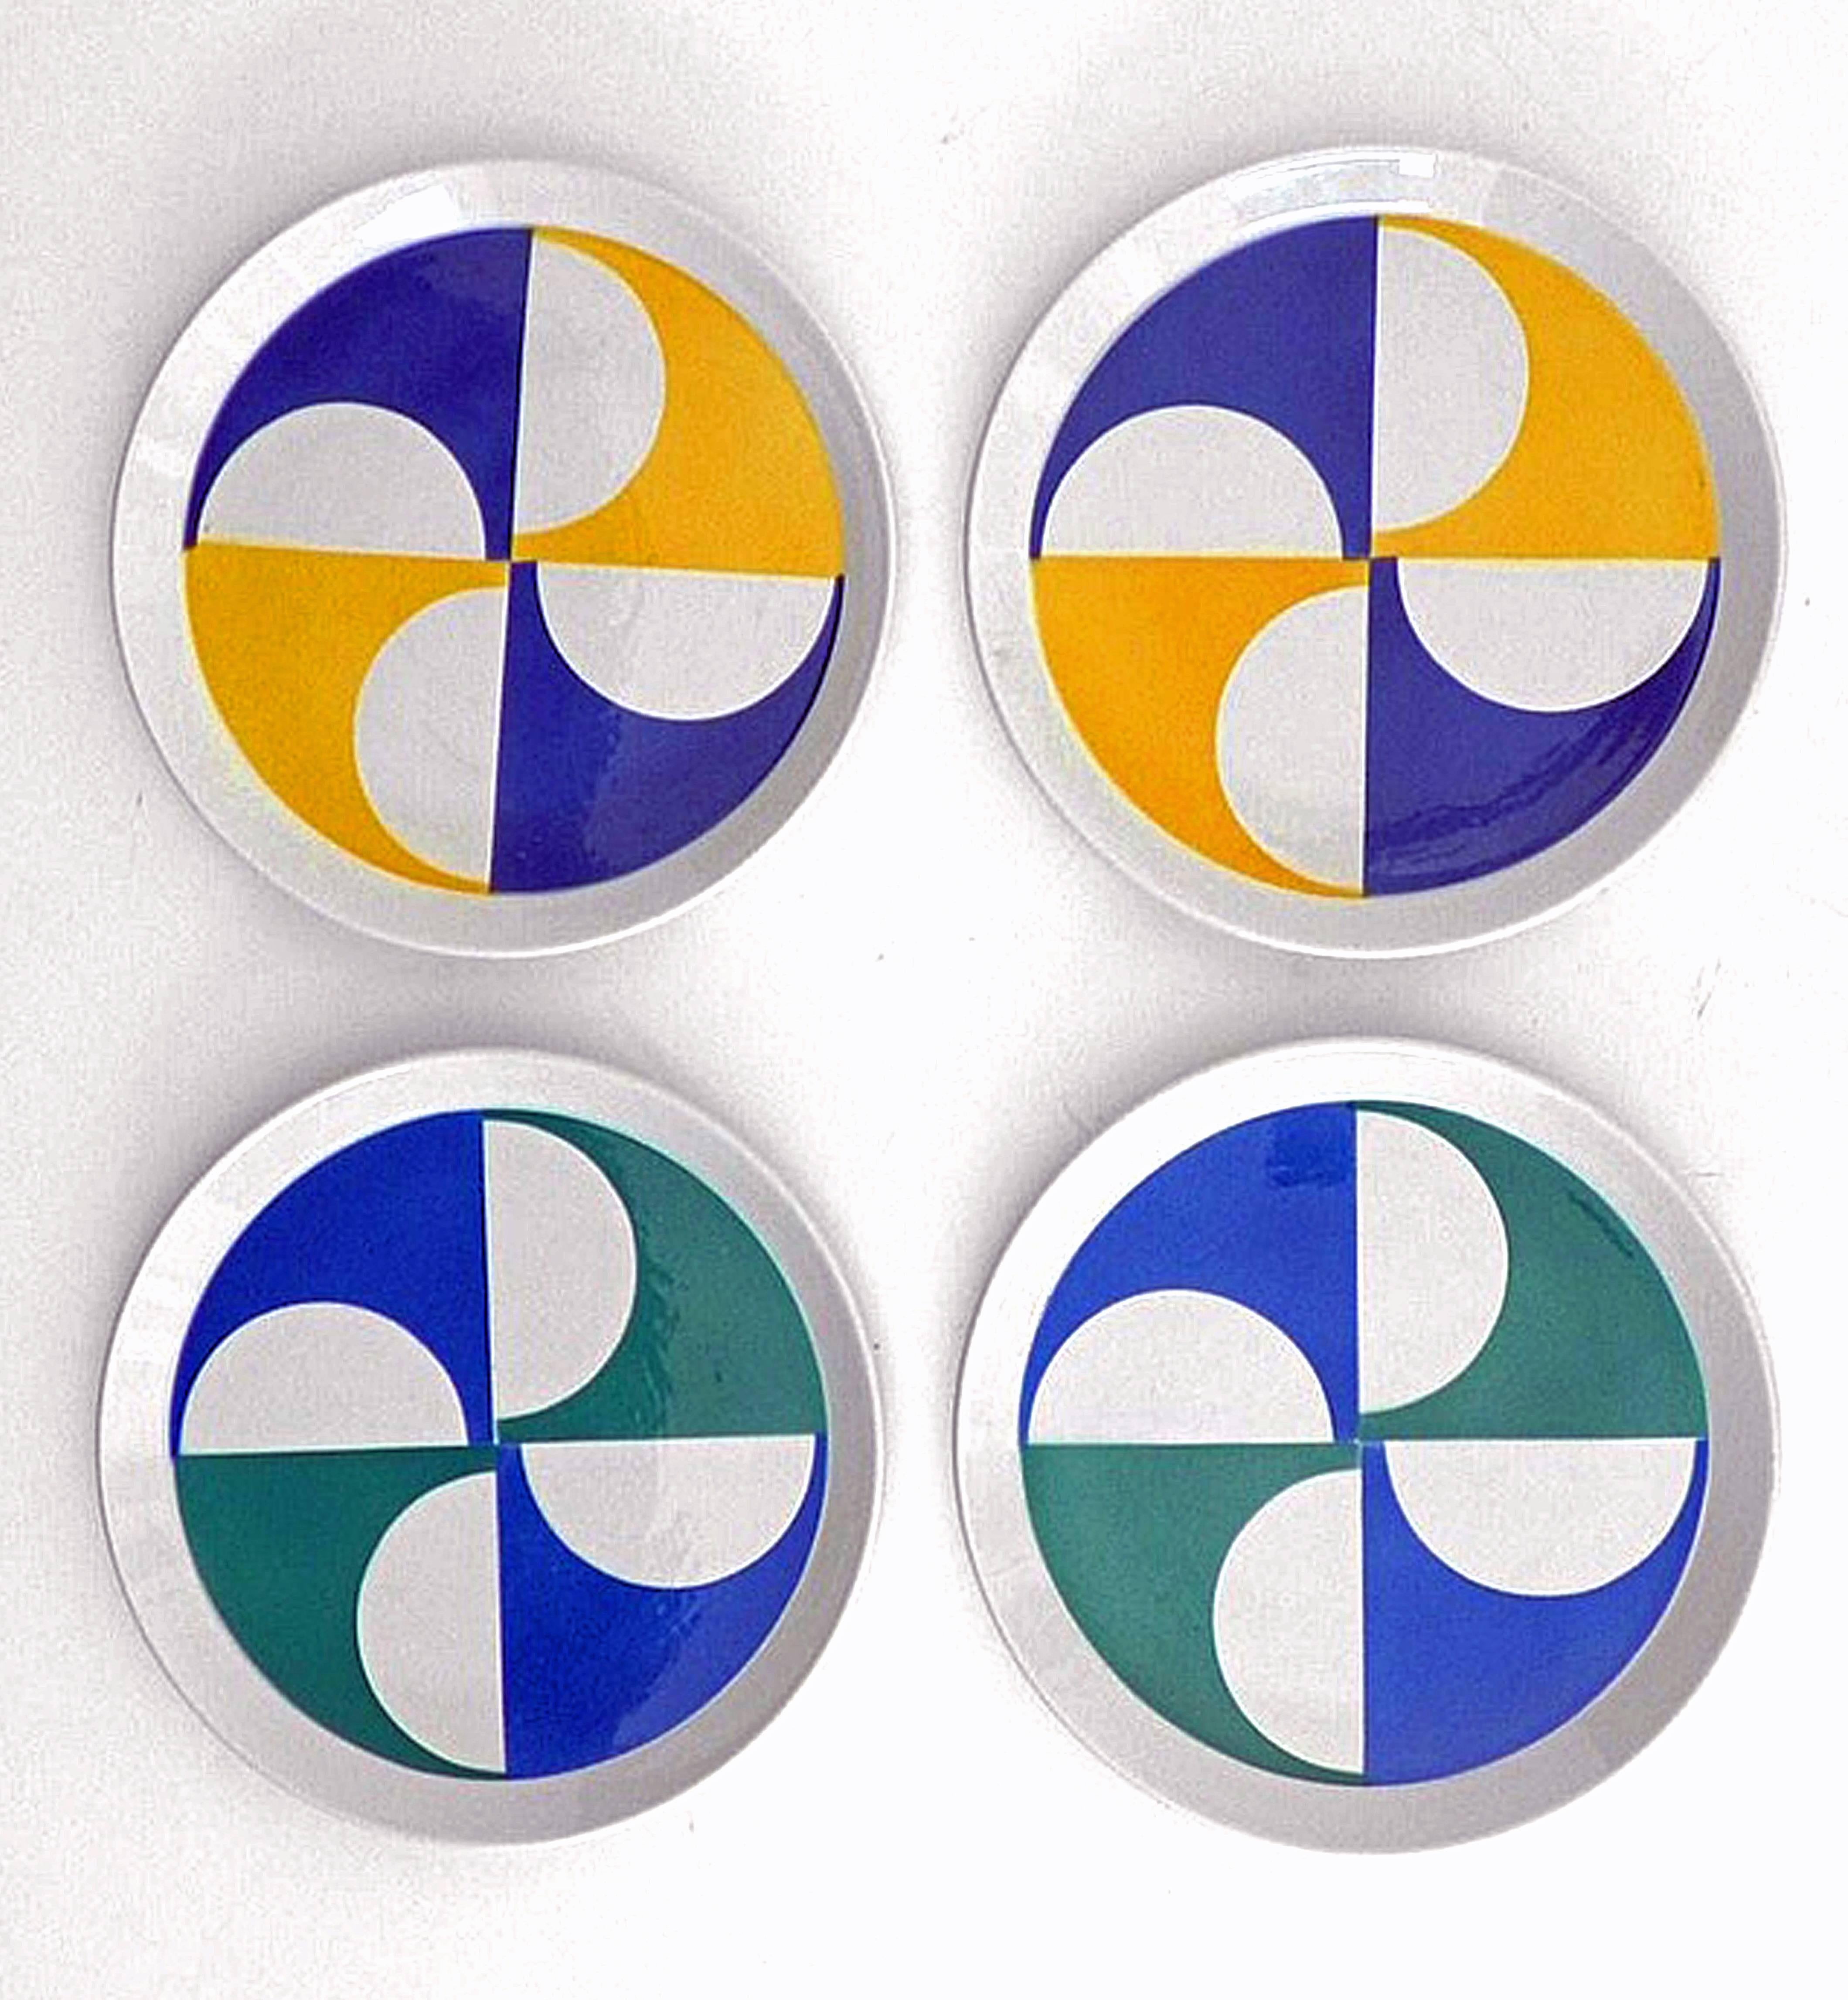 The Gio Ponti modernist plates were made at Ceramica Franco Pozzi, Gallarate. The four plates, two of each color, look like aeroplane propellers creating a powerful and dramatic swirl of energy.

Piatti Pozzi, tableware for Ceramica Franco Pozzi,